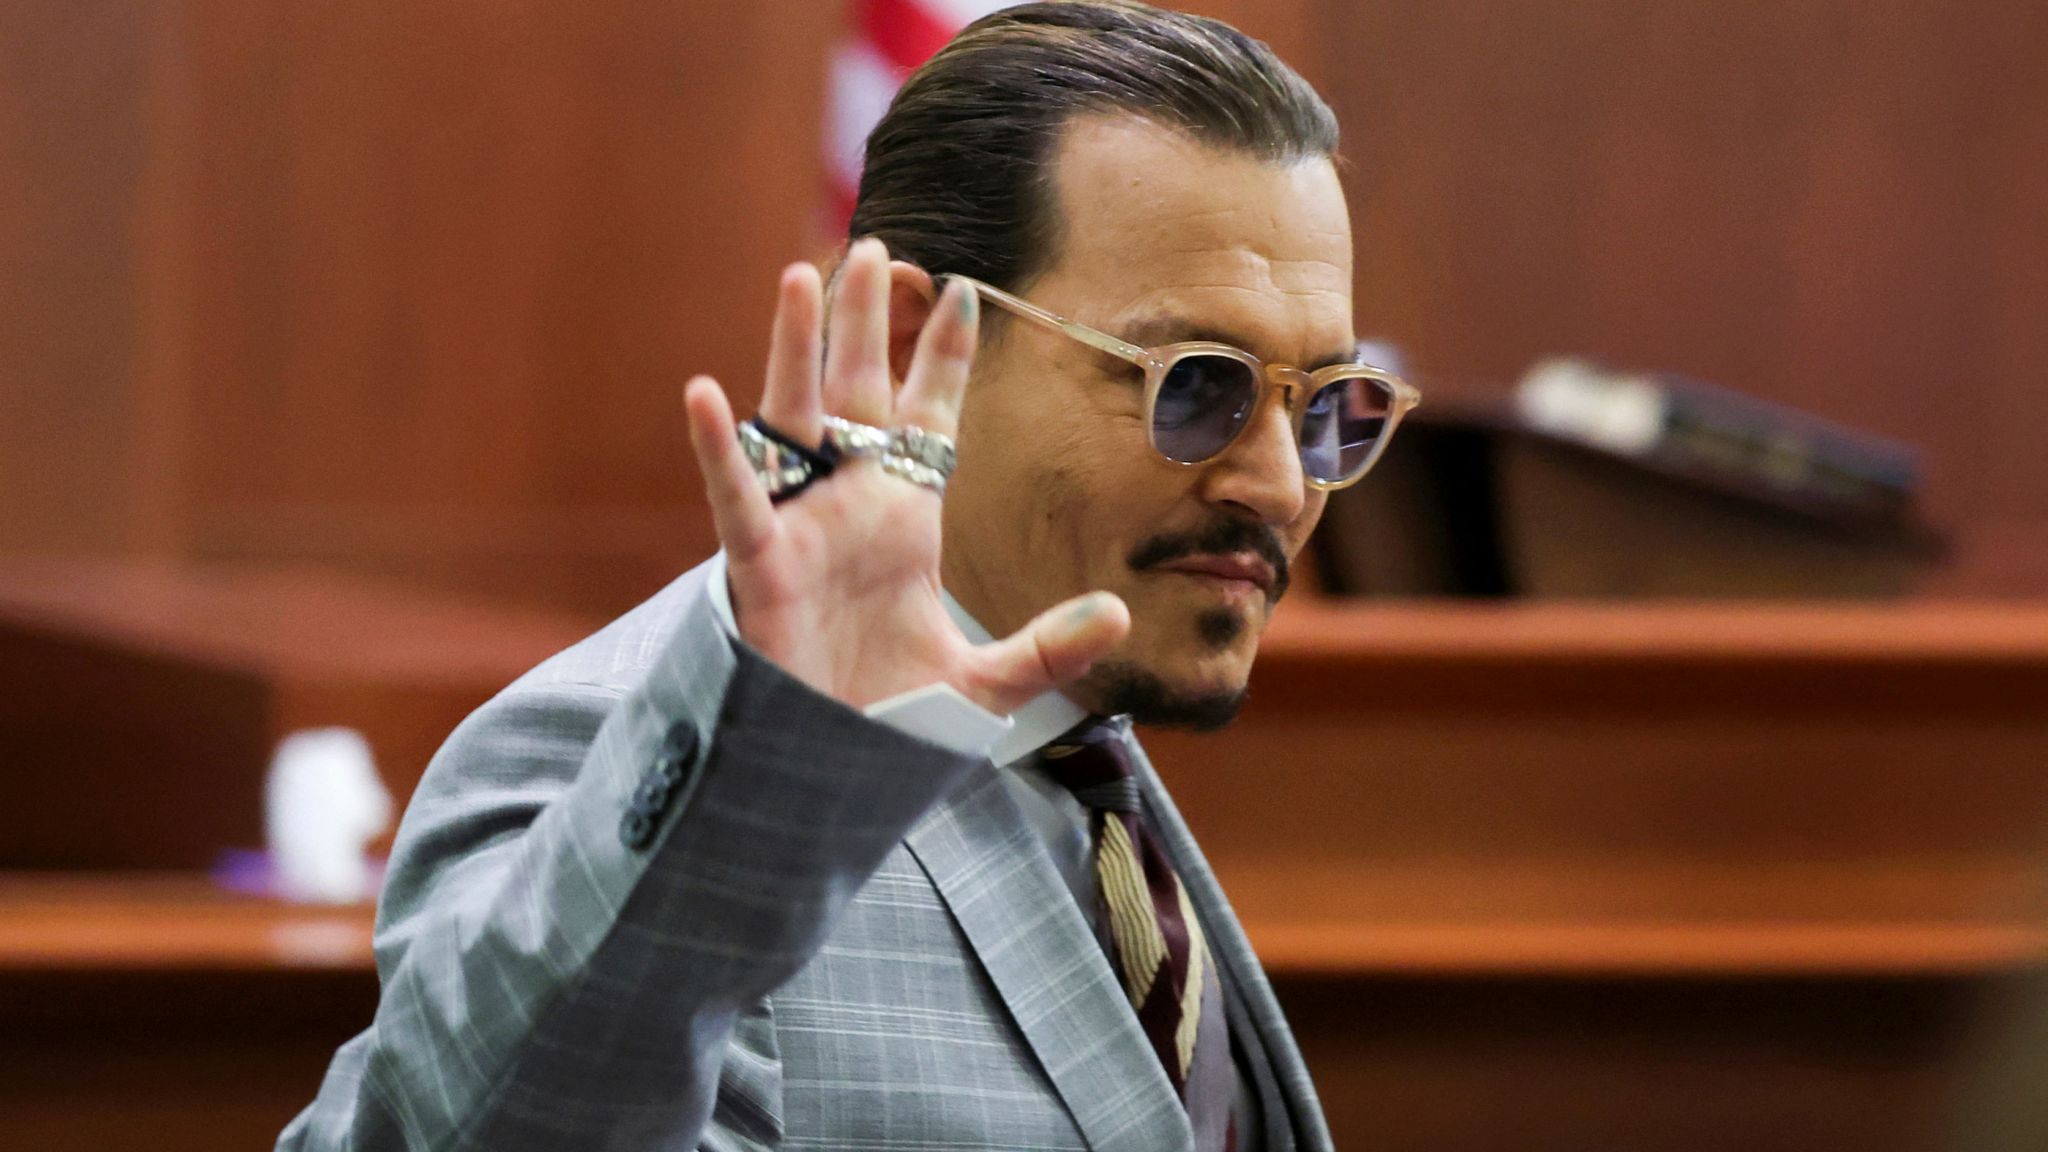 Actor Johnny Depp reacts as he leaves for a break during the Depp vs Heard defamation trial at the Fairfax County Circuit Court in Fairfax, Virginia, U.S. May 26, 2022. Michael Reynolds/Pool via REUTERS 